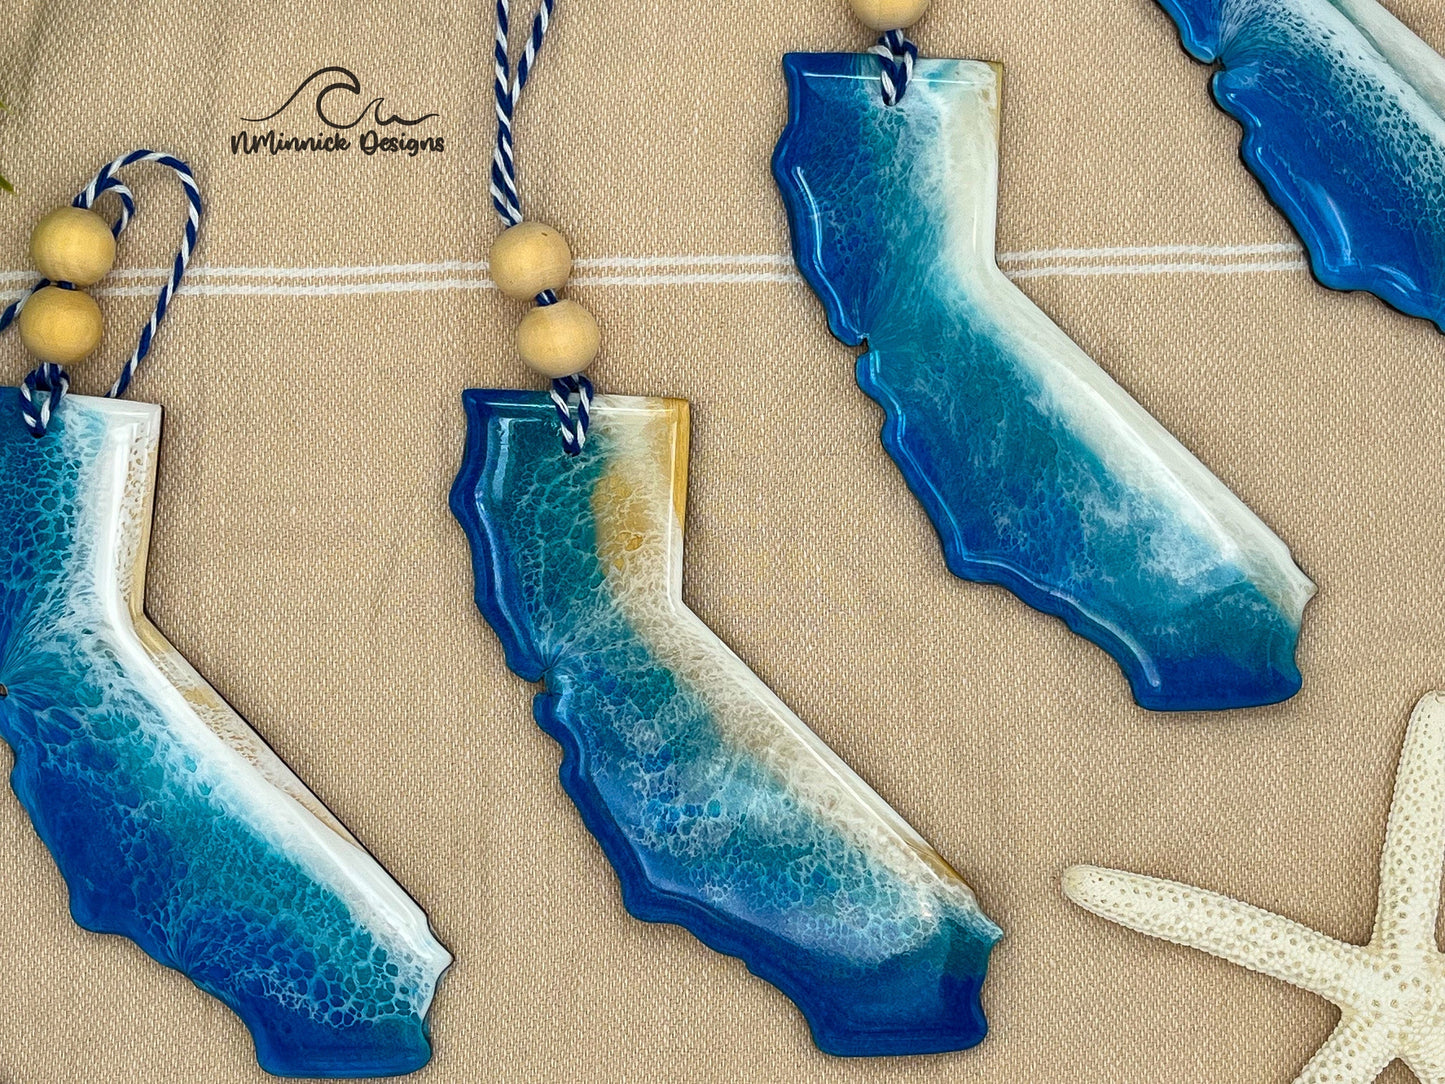 California-shaped wooden Christmas ornament covered in blue and teal colored ocean resin art resembling the waves along California&#39;s Pacific Coast. Finished with blue and white baker&#39;s twine and two wooden beads.